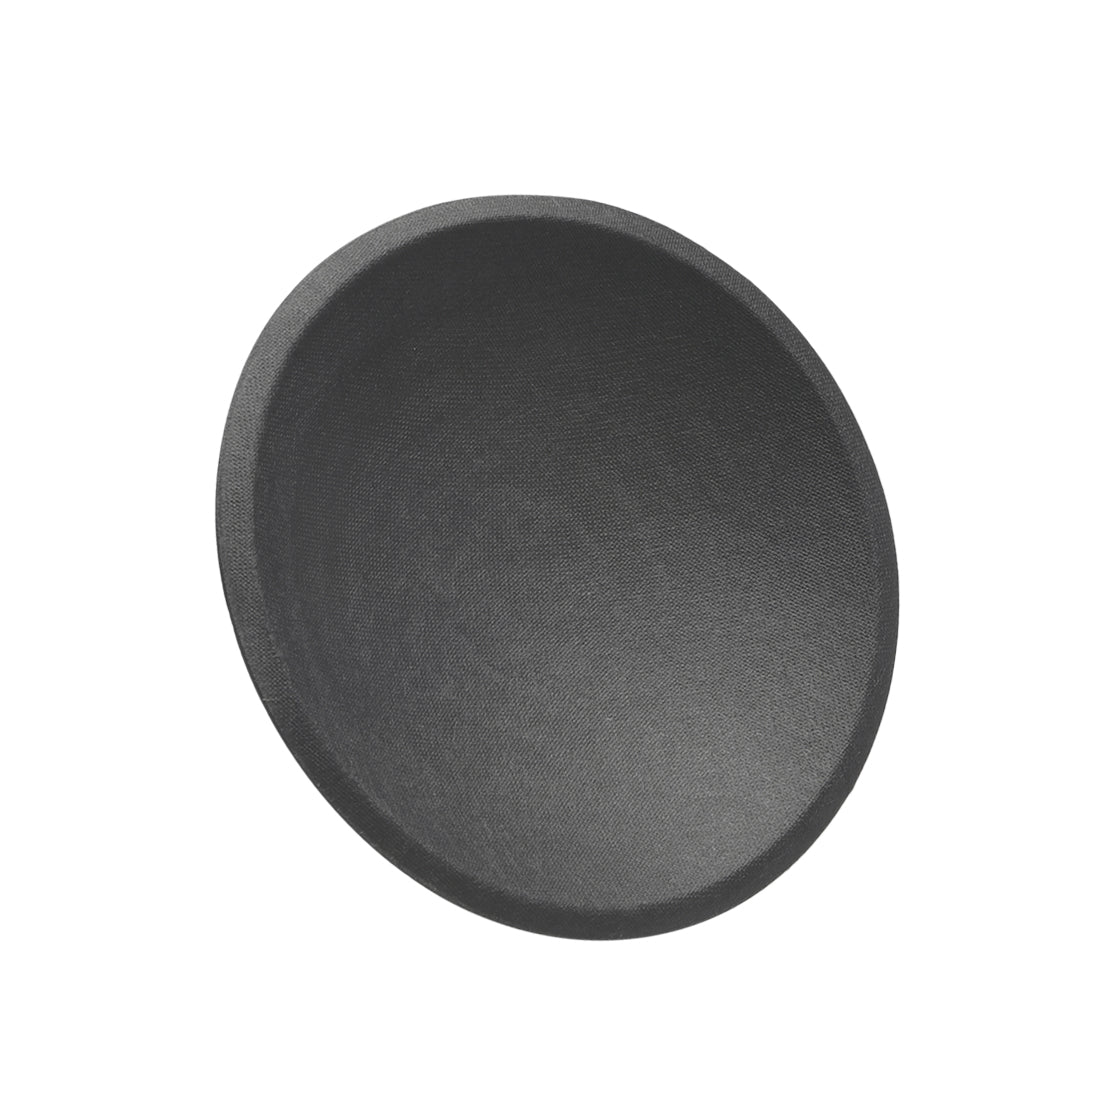 uxcell Uxcell Speaker Dust Cap 90mm/3.5" Diameter Subwoofer Paper Dome Coil Cover Caps